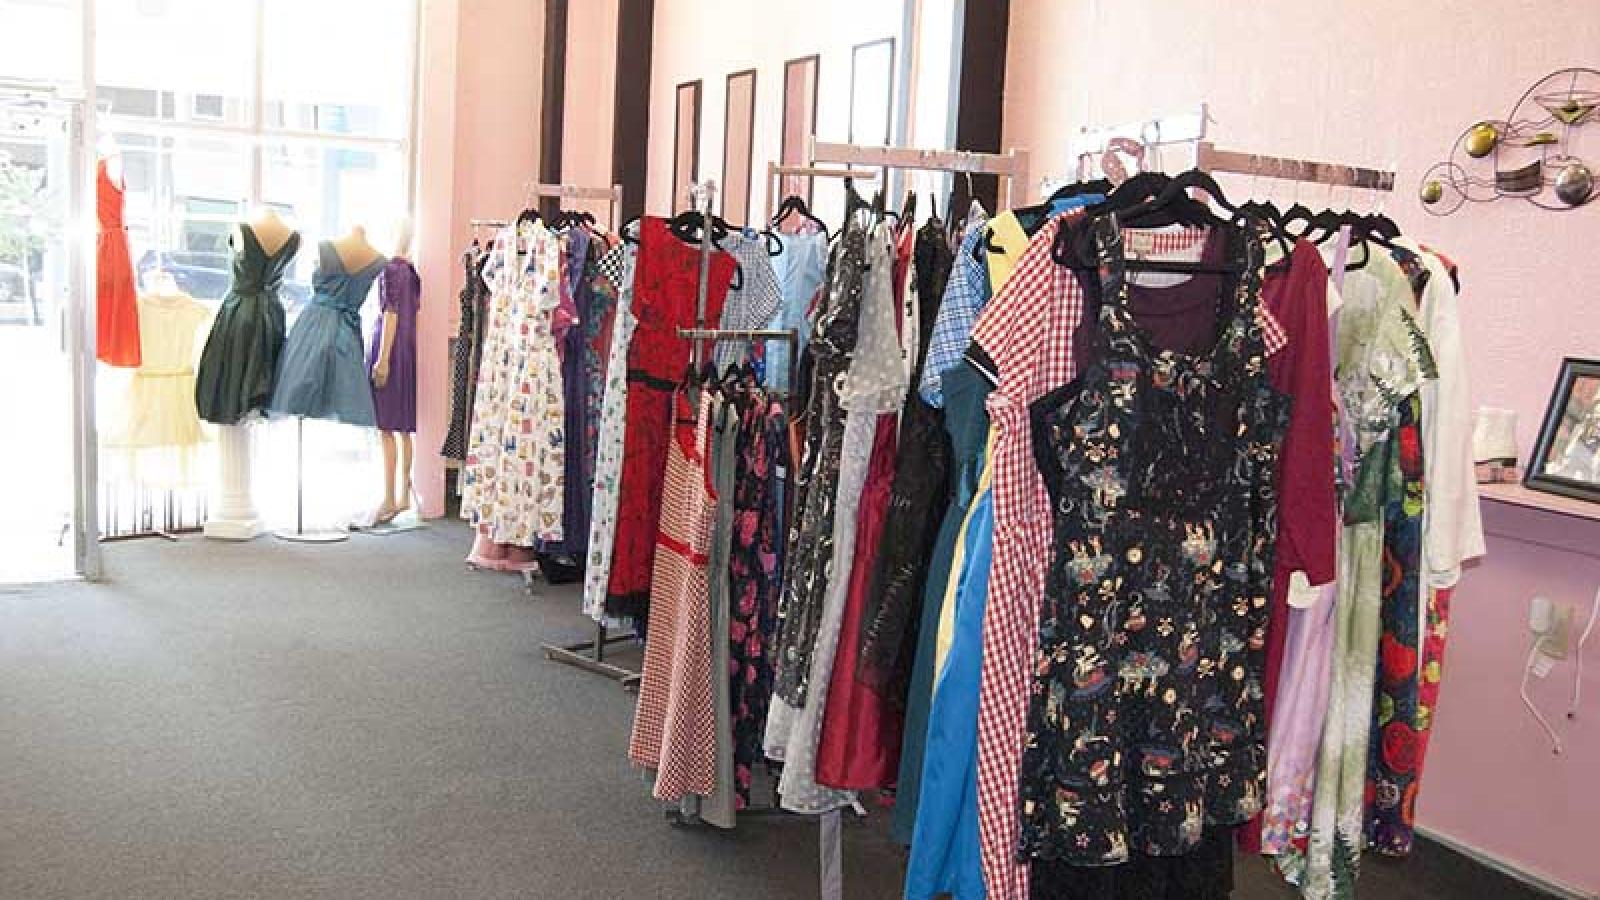 dresses on racks at the store